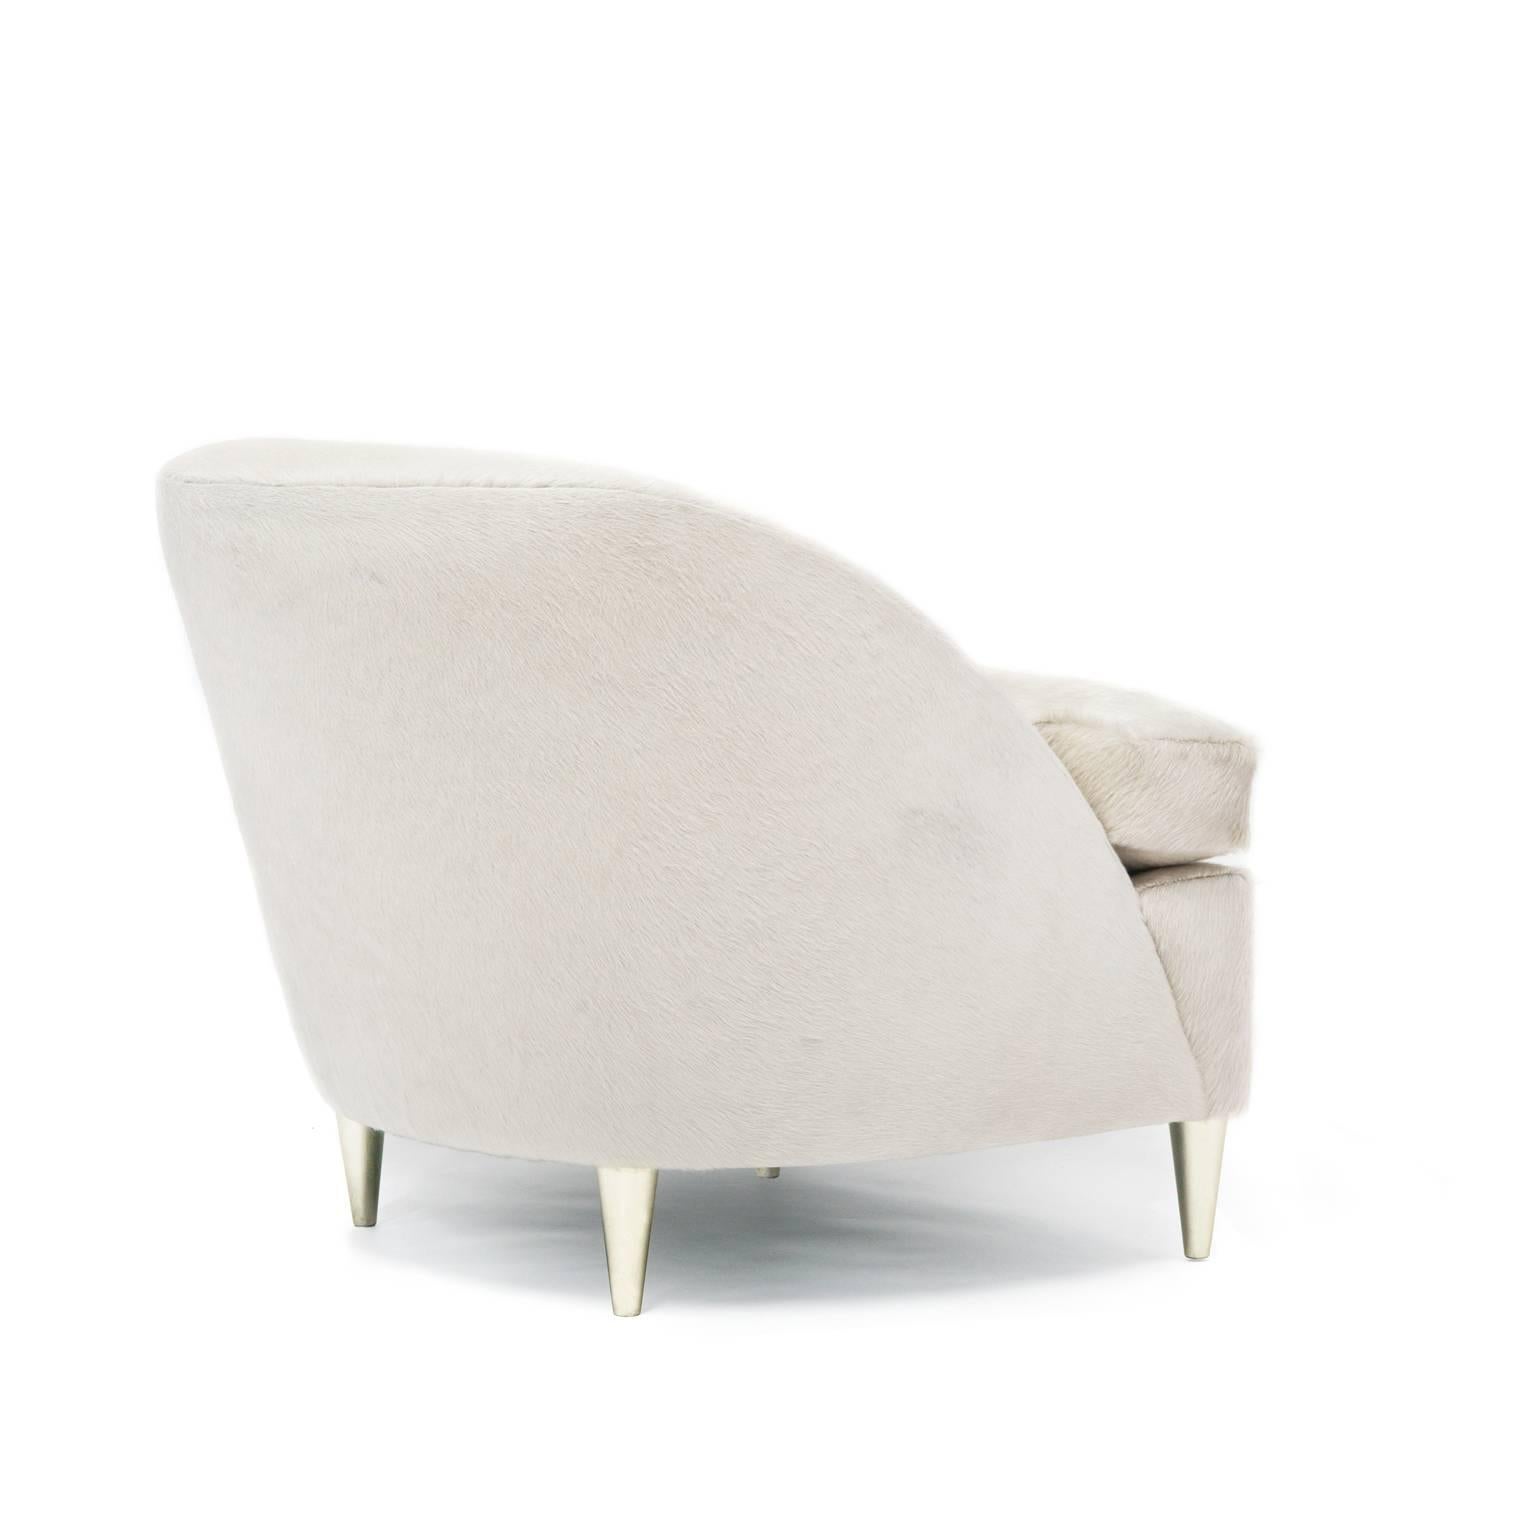 Atelier Demiurge Editions CZ Slipper Chair shown in natural white hide with gilded white gold legs. Inquire for customization options. COM 5 yards.
 
Atelier Demiurge Editions pieces are made to order. Please contact the gallery for a